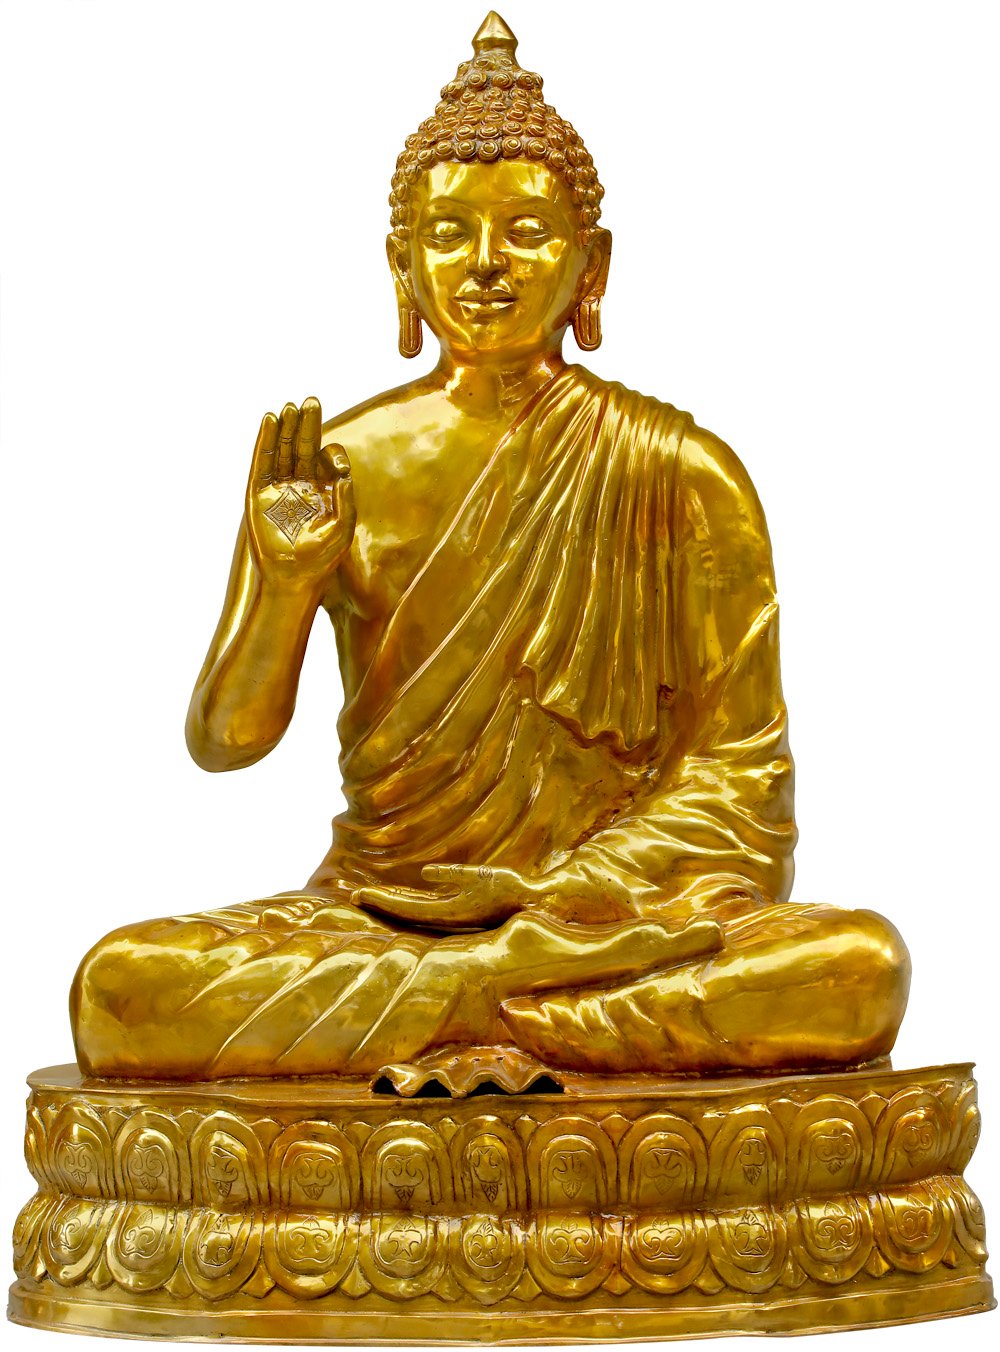 Brass Statue Exotic India Buddha Seated On A Lotus Color Green GoldColor His Hand In Bhumisparsha Mudra